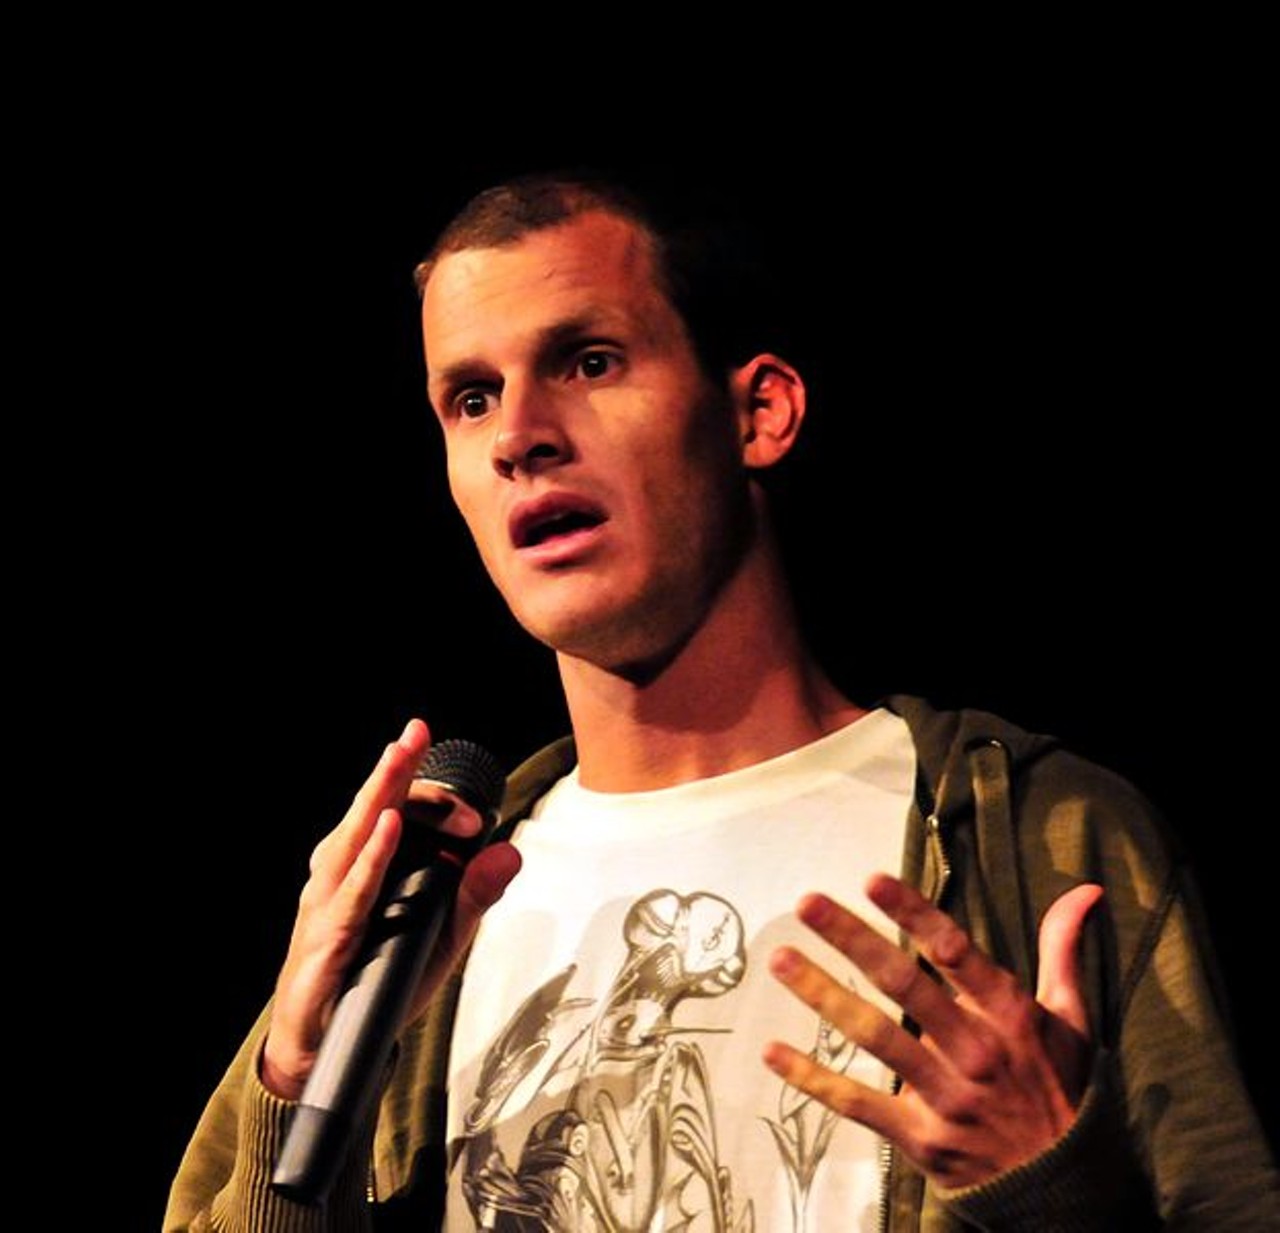 Daniel Tosh- A stand up comedian and host of the show Tosh.0 on Comedy Central.